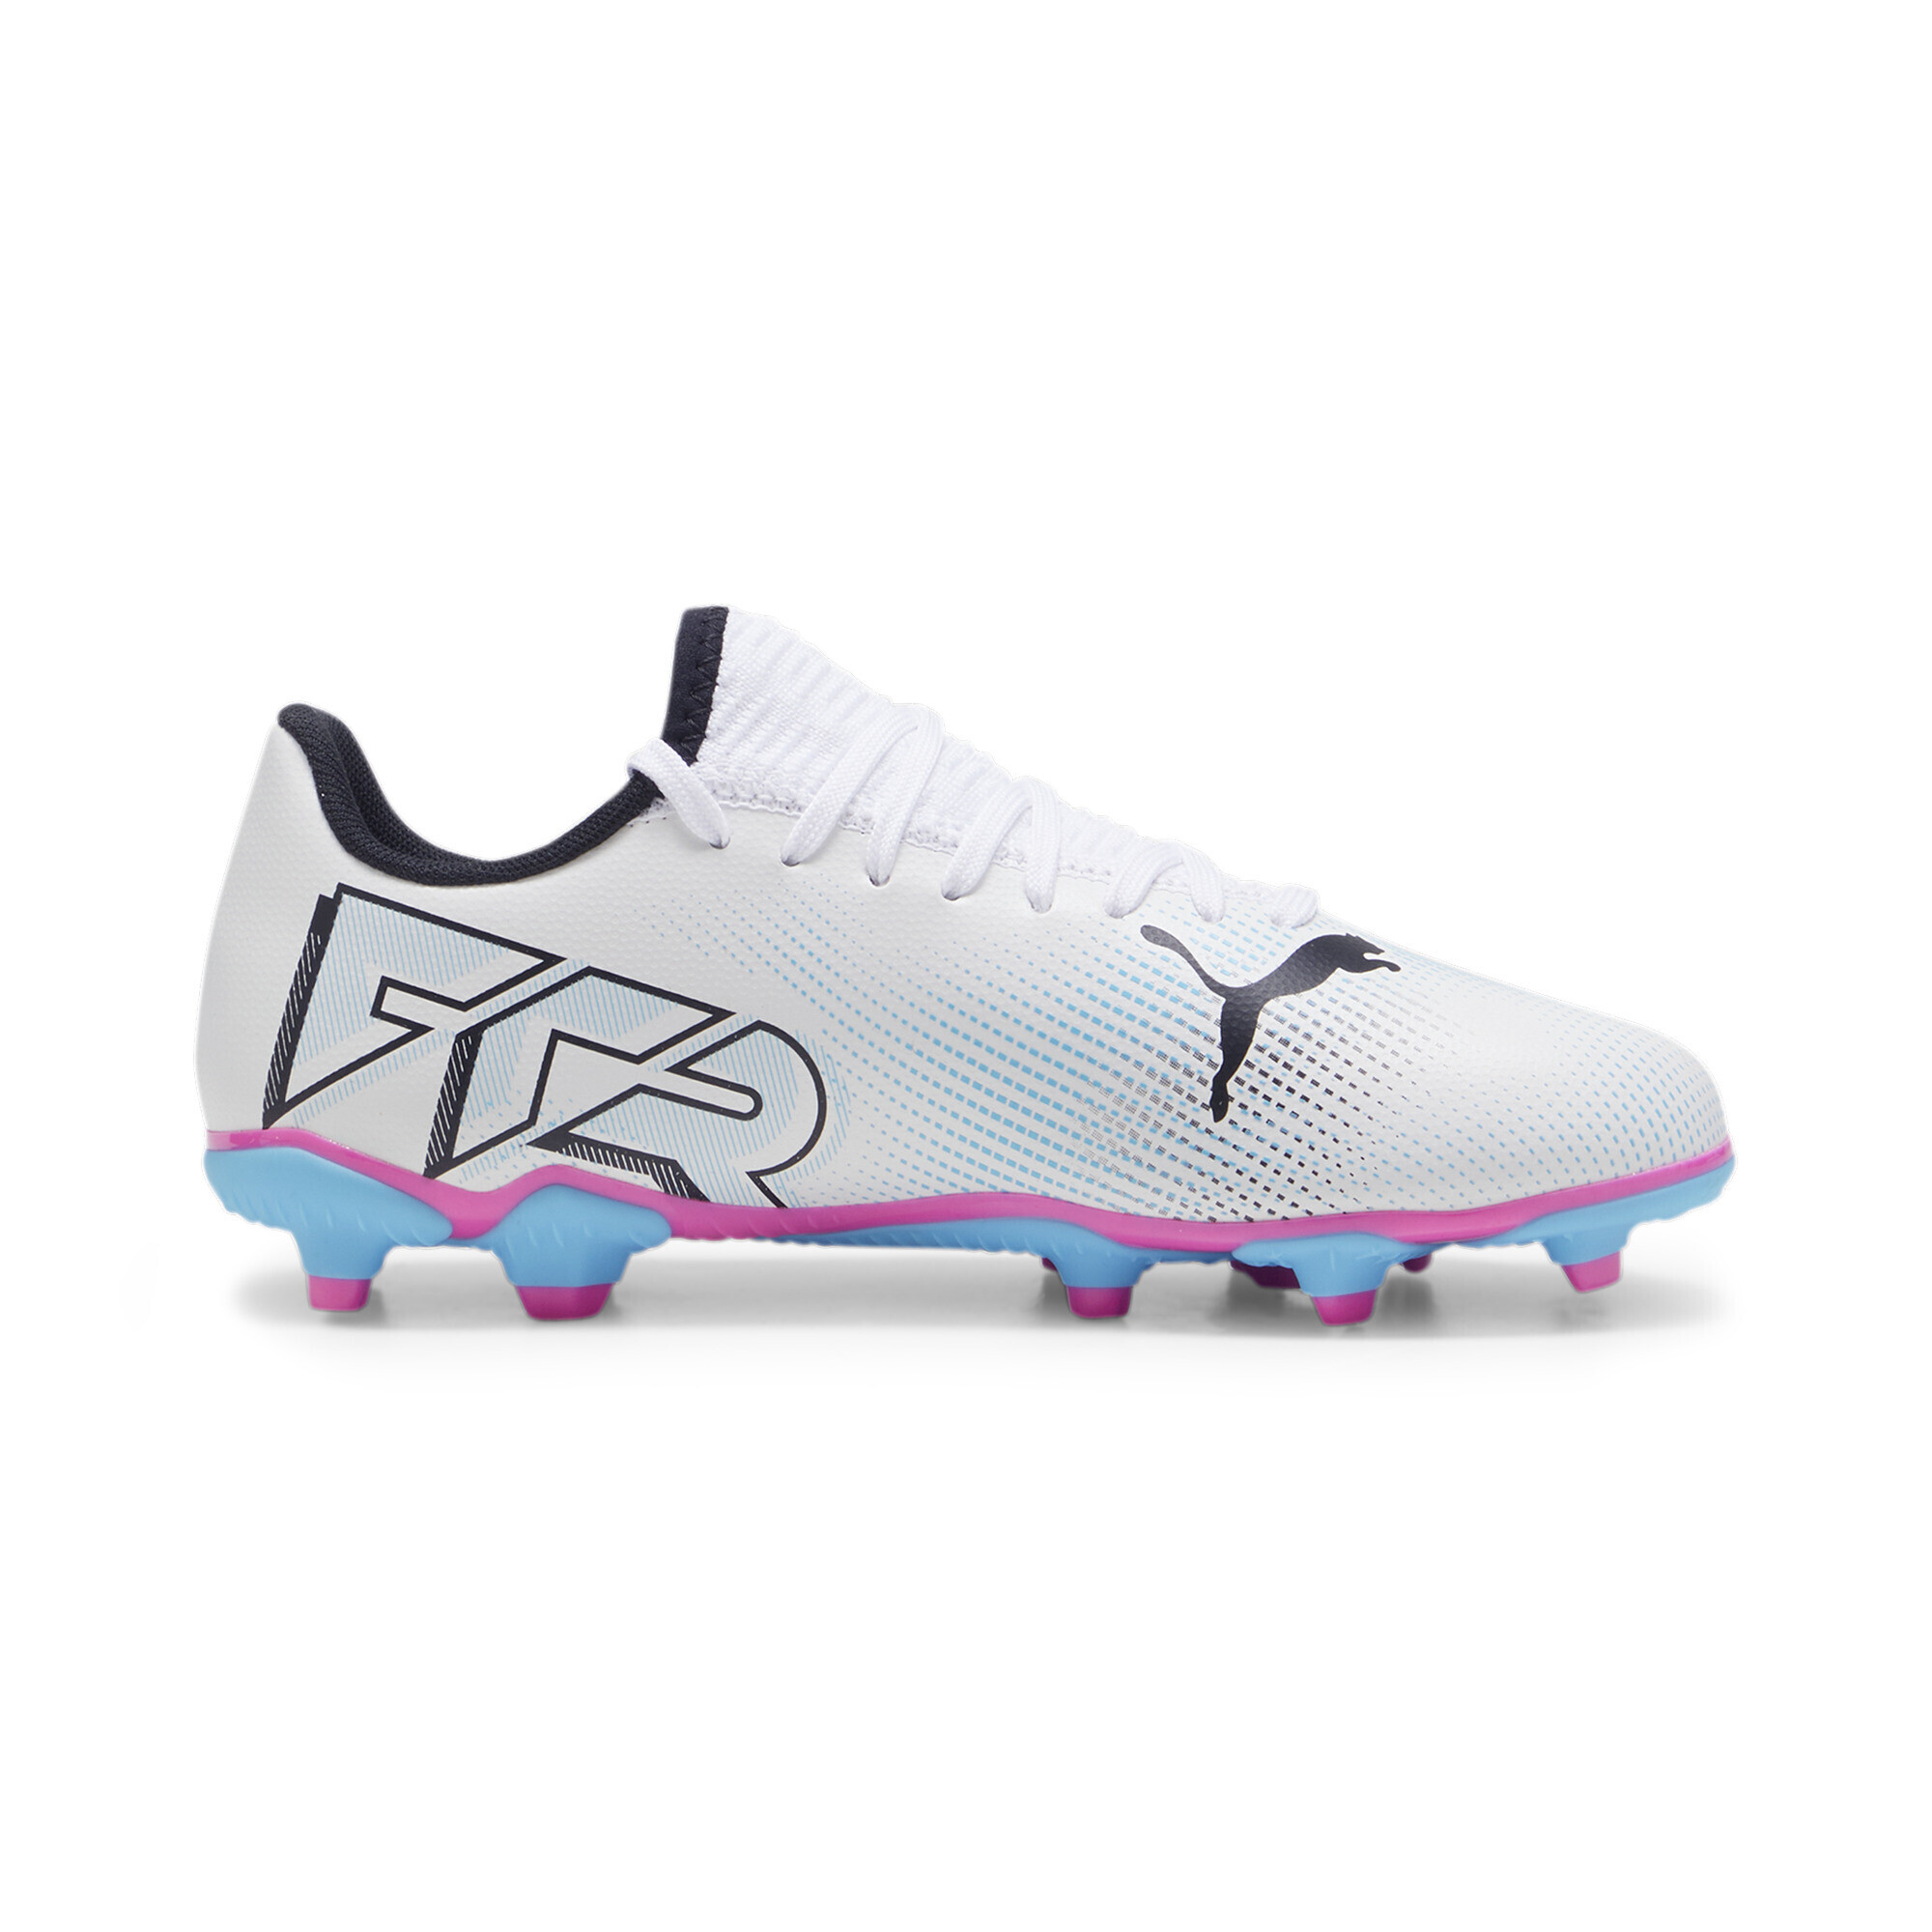 PUMA FUTURE 7 PLAY FG/AG Youth Football Boots In White/Pink, Size EU 35.5